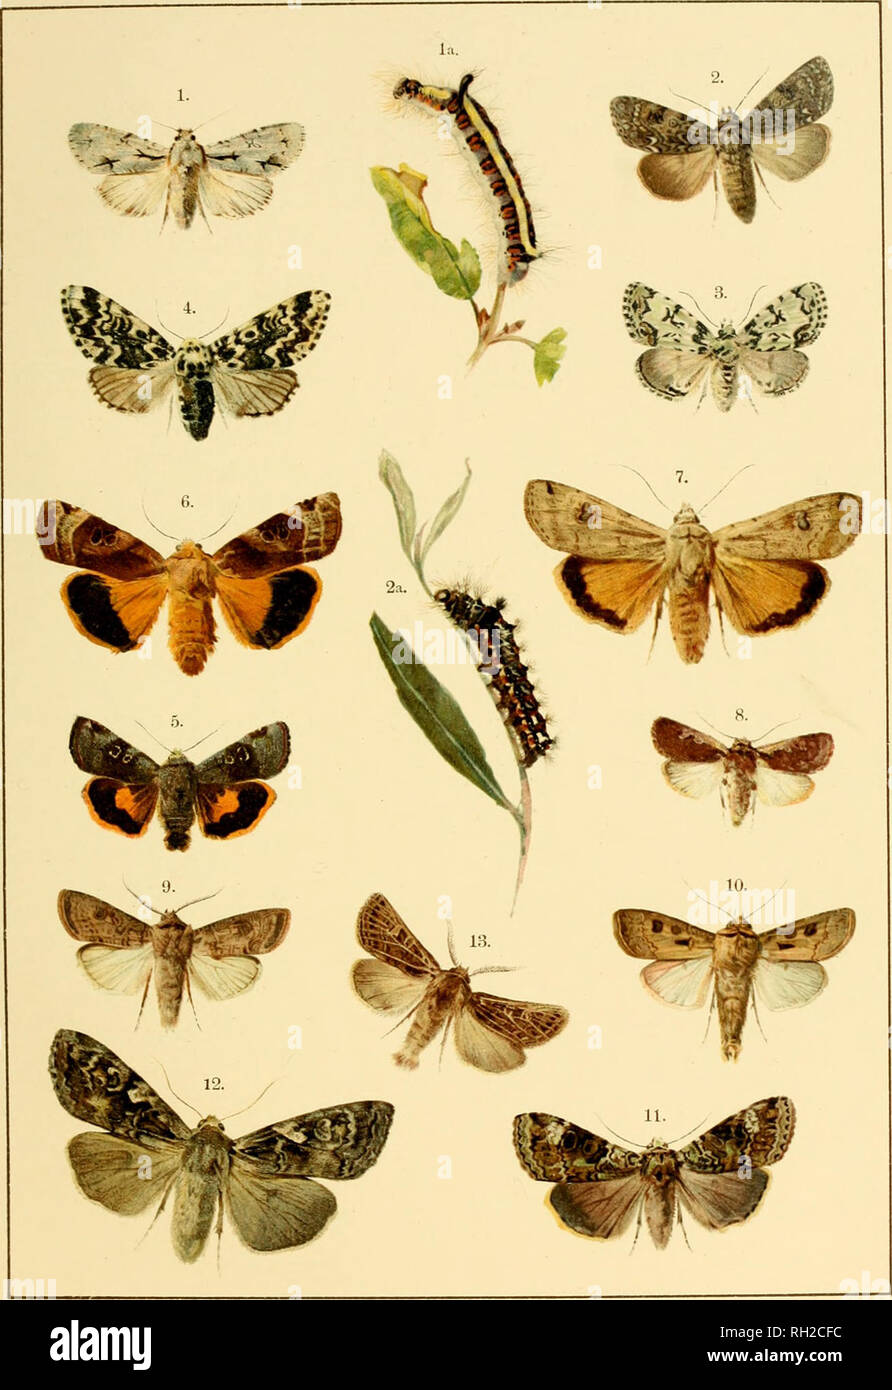 . British and European butterflies and moths (Macrolepidoptera). Lepidoptera -- Great Britain; Lepidoptera -- Europe. PLATE XXIV.. I. Acronycta psi. la. Larva. 2 Acronycta lumicis, 2a. Larva. 3. Moma orion. 4. Panthia coenobita. 5. Triphffina ianthina. 6. Triplia;na fimbria. 7. Tripba;na pronuba. 8. Agrotis plecta. 9. Agrotis segetum. 10. Agrolis c.xclamationis. 11. Aplecta prasina. 12. Aplecta occulta. 13. Neuroiiia popularis. British and European Butterflies and Moths,. Please note that these images are extracted from scanned page images that may have been digitally enhanced for readability  Stock Photo